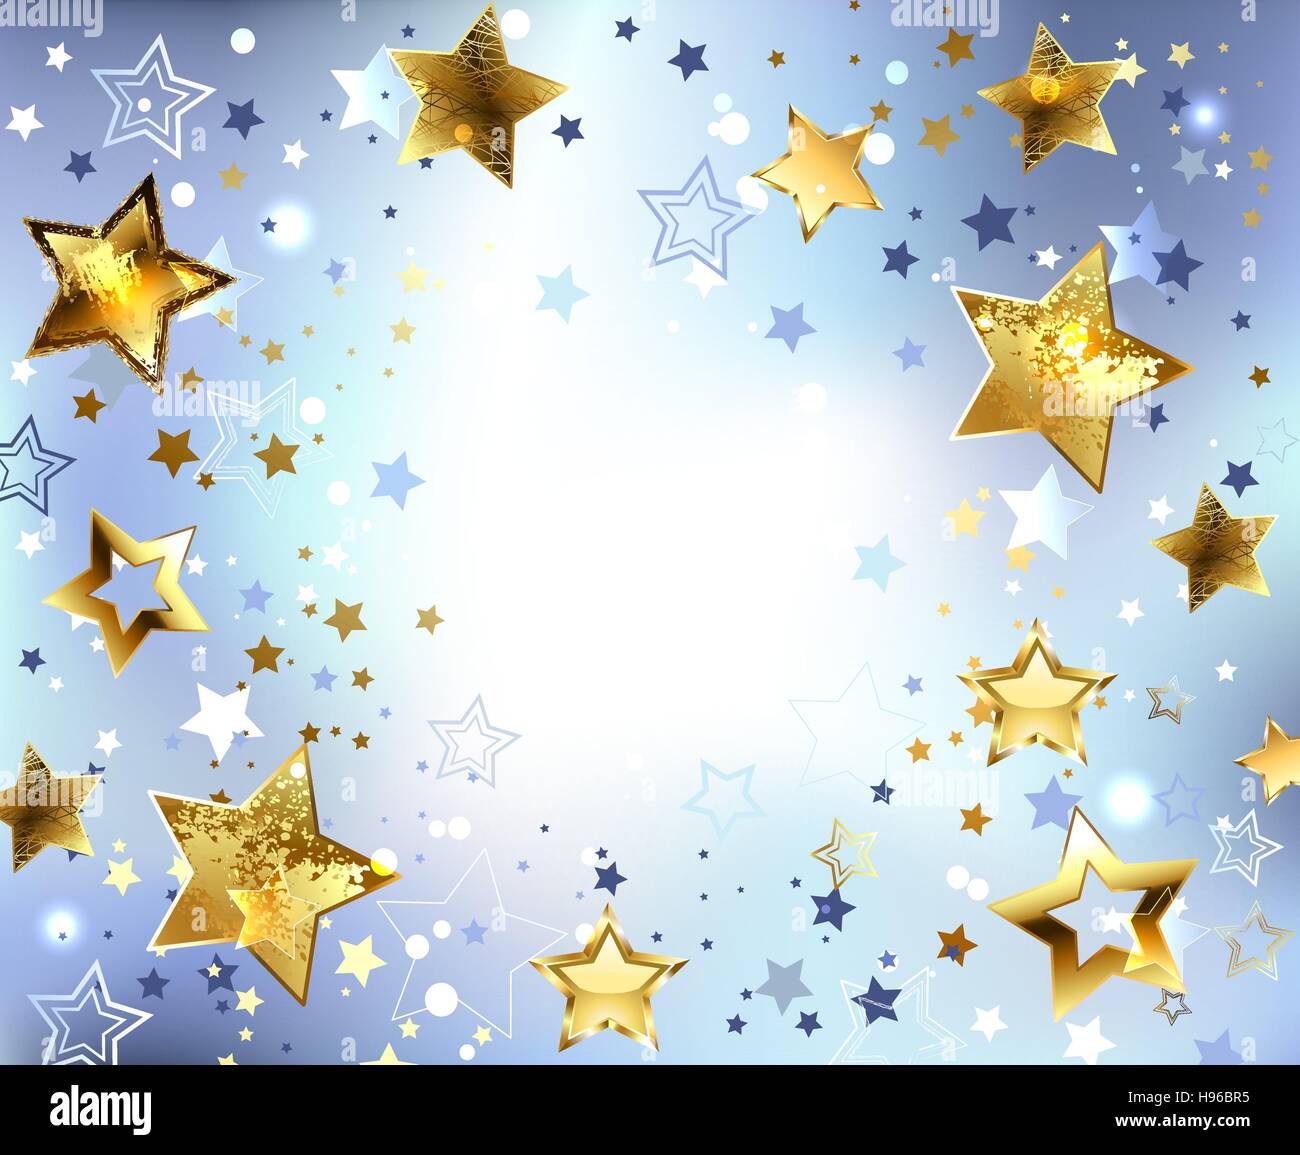 Best 100 Background gold stars Free download, high quality